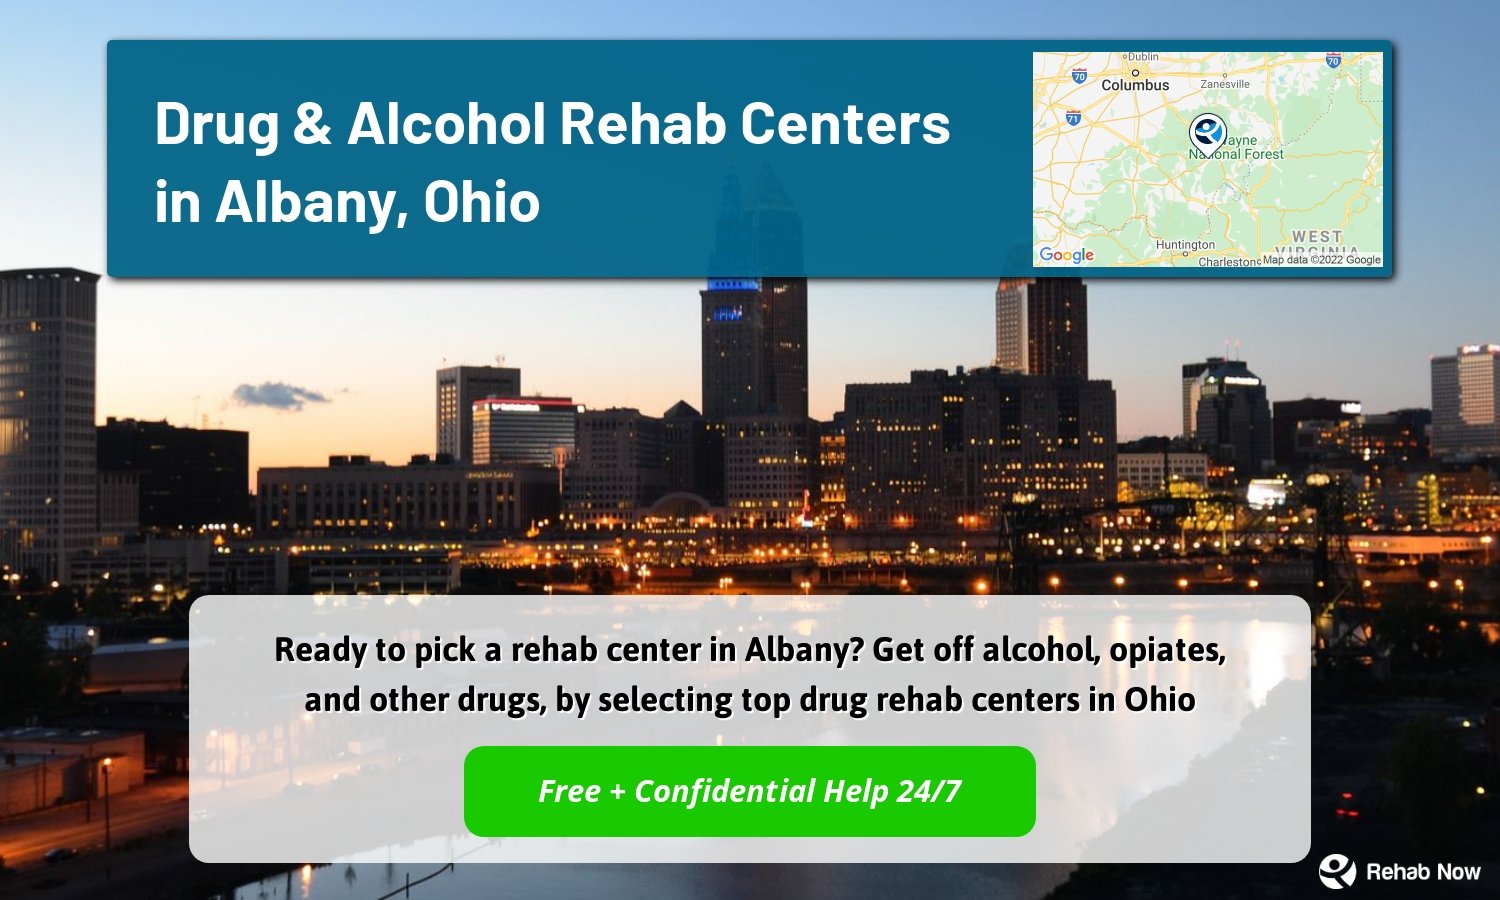 Ready to pick a rehab center in Albany? Get off alcohol, opiates, and other drugs, by selecting top drug rehab centers in Ohio